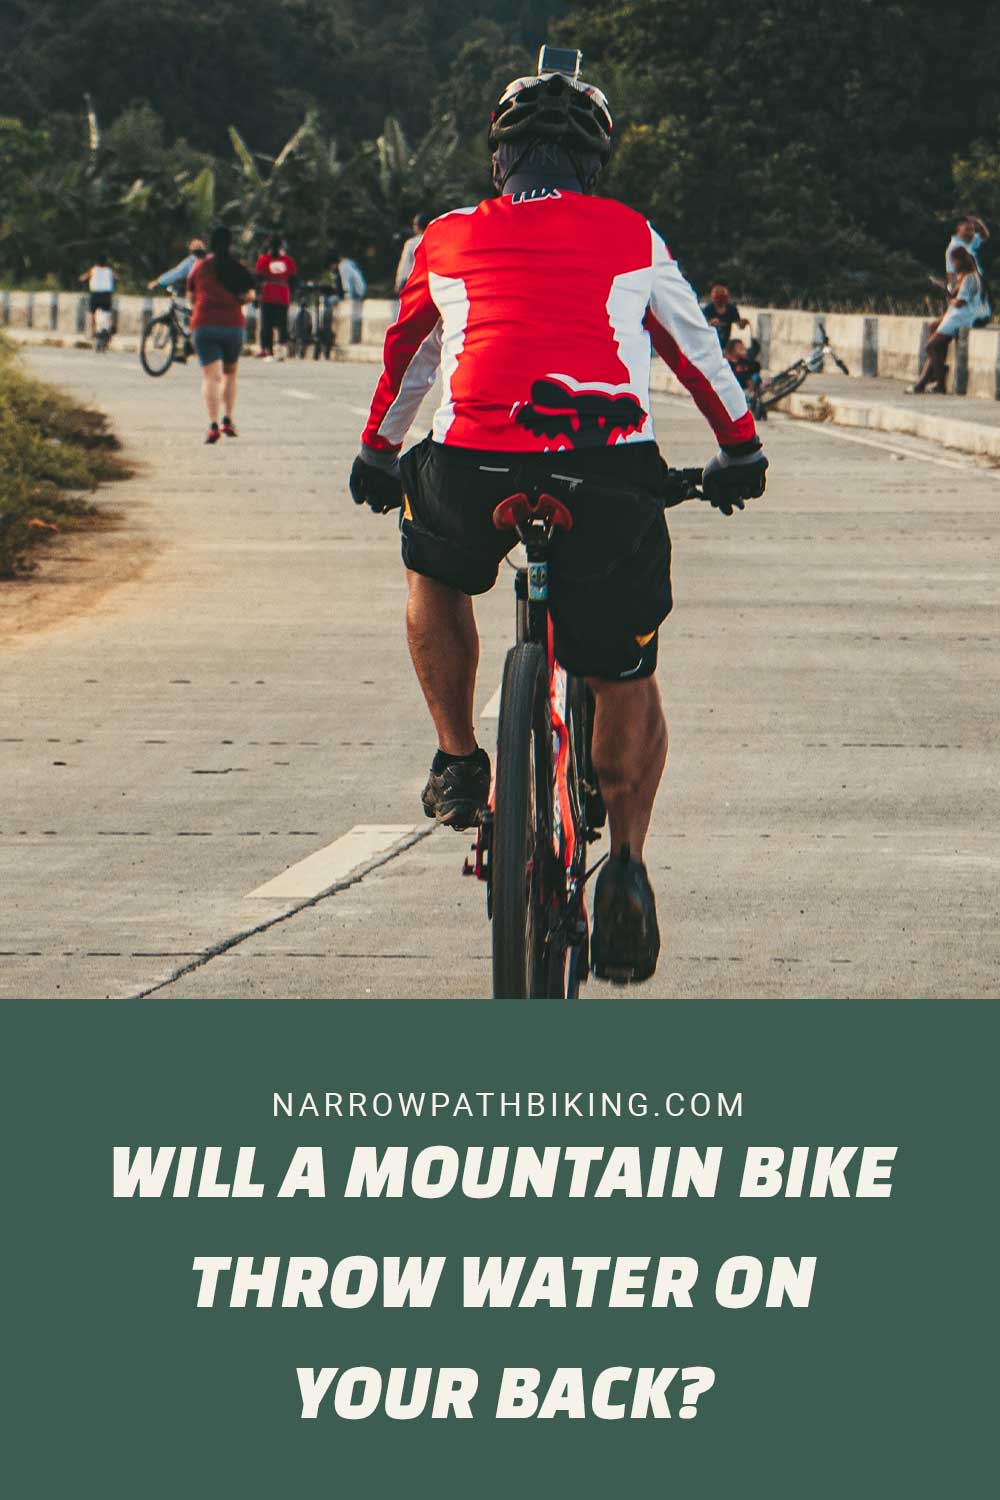 Will a Mountain Bike Throw Water on your Back?